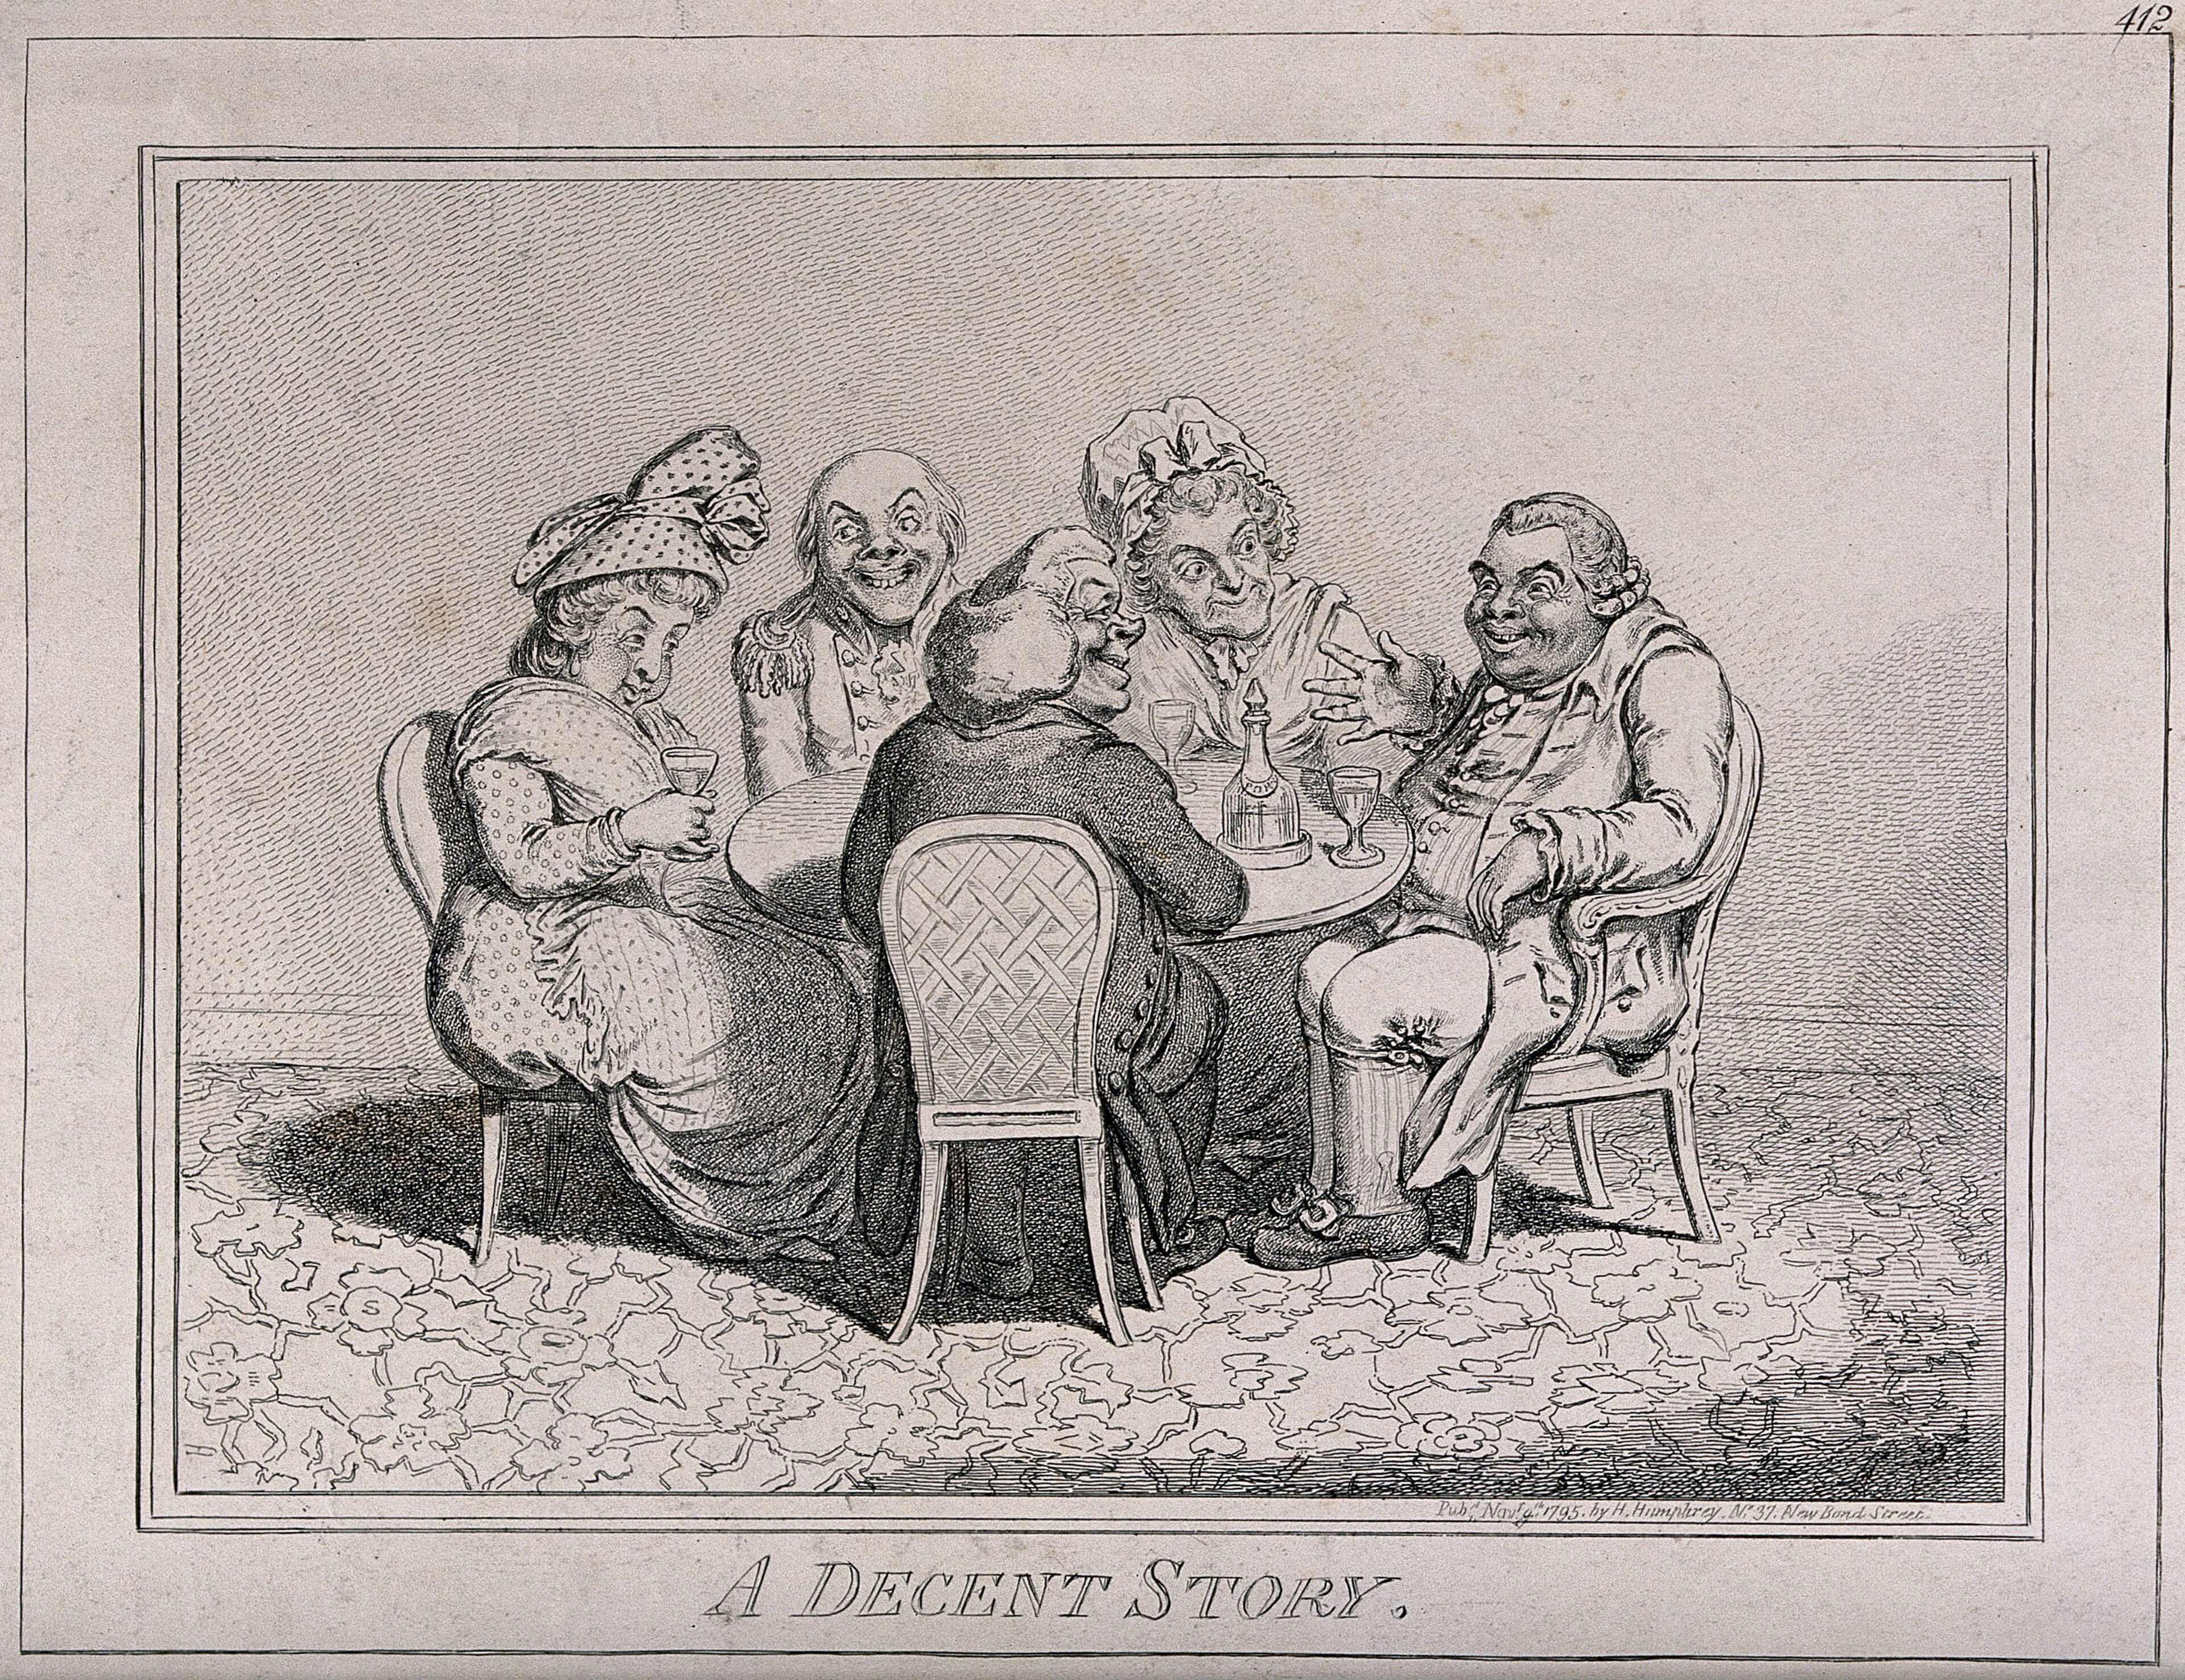 Five elderly people sit at a table drinking port as one man tells a story. Etching, c. 1795.